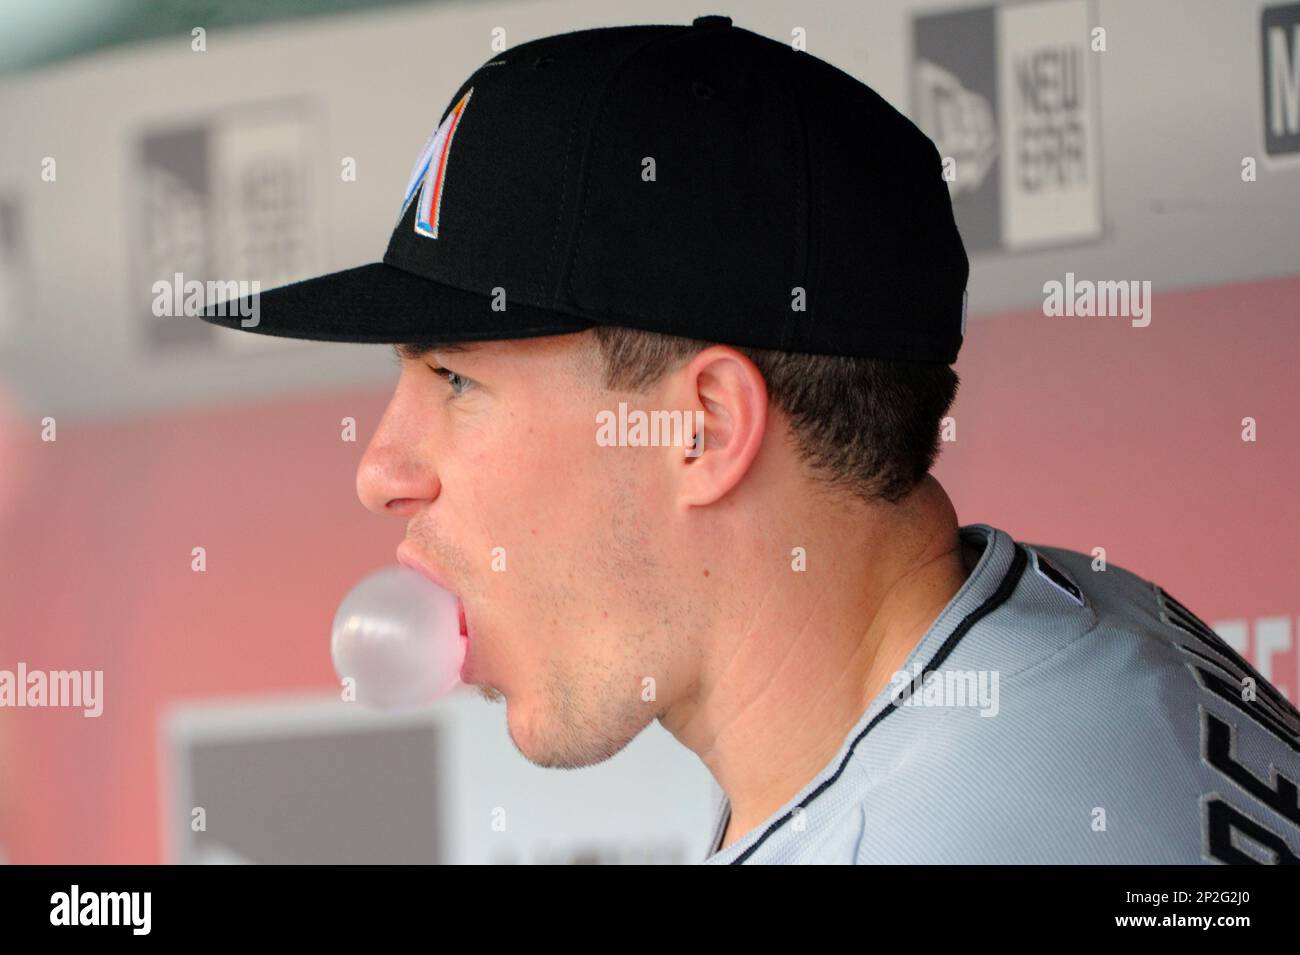 30 August 2015: Miami Marlins catcher J.T. Realmuto (20) blows a bubble in  the dugout against the Washington Nationals at Nationals Park in  Washington, D.C. where the Washington Nationals defeated the Miami